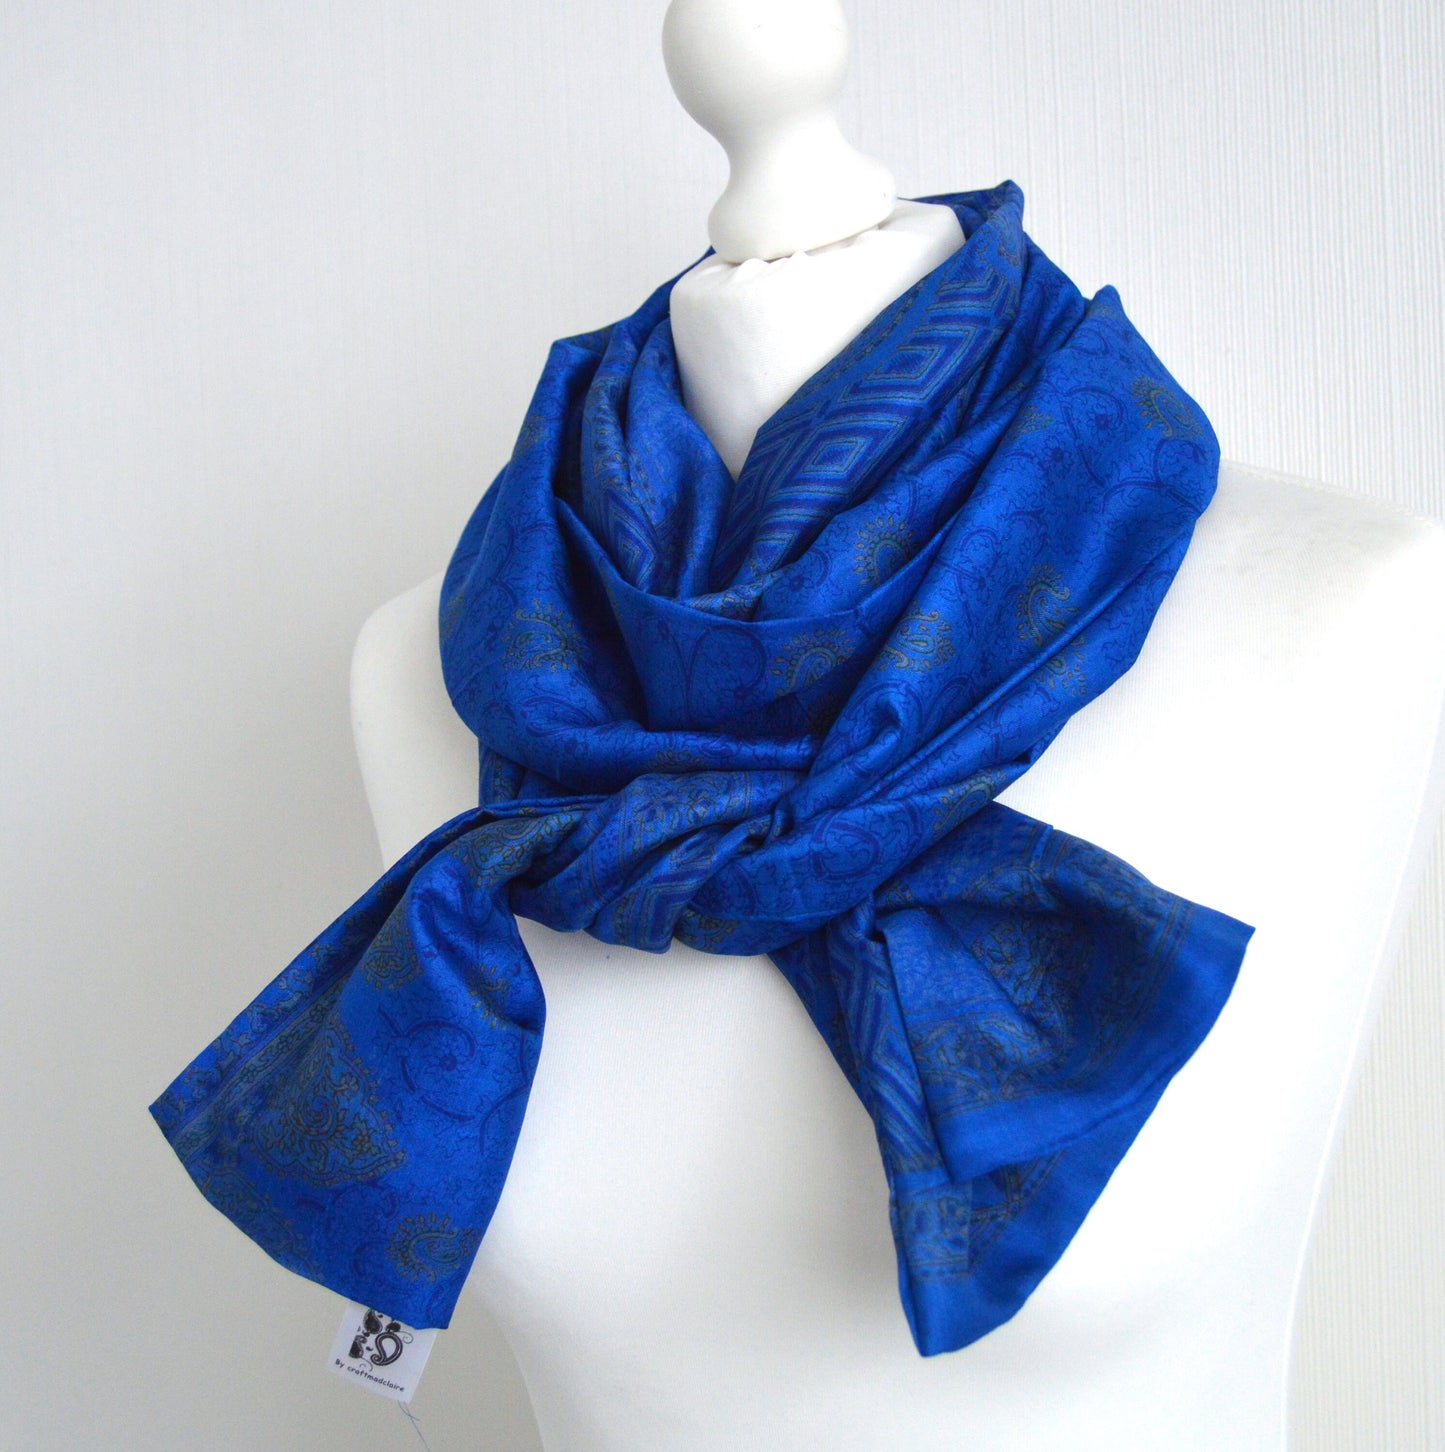 Royal Blue Grey Sari Silk Scarf - Sophisticated Bohemian Eco Friendly Unisex Scarf - Ethical Sustainable Christmas Gift For Her or Him